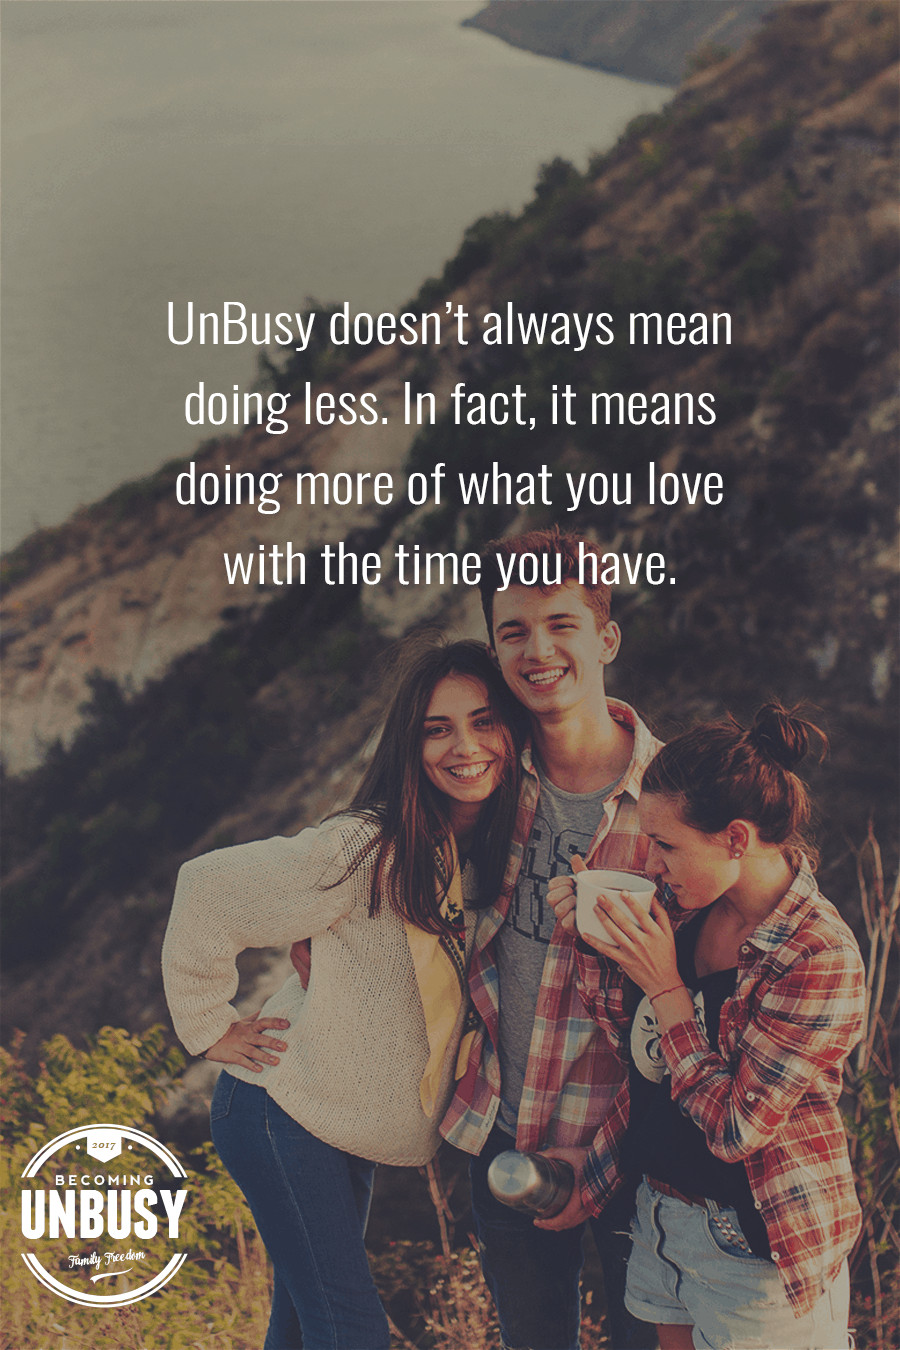 UnBusy doesn't always mean doing less. In fact, it means doing more of what you love with the time you have. #parenting #modernparenting #becomingunbusy #parentingtweens #parentingteens *loving these tips on slowing down